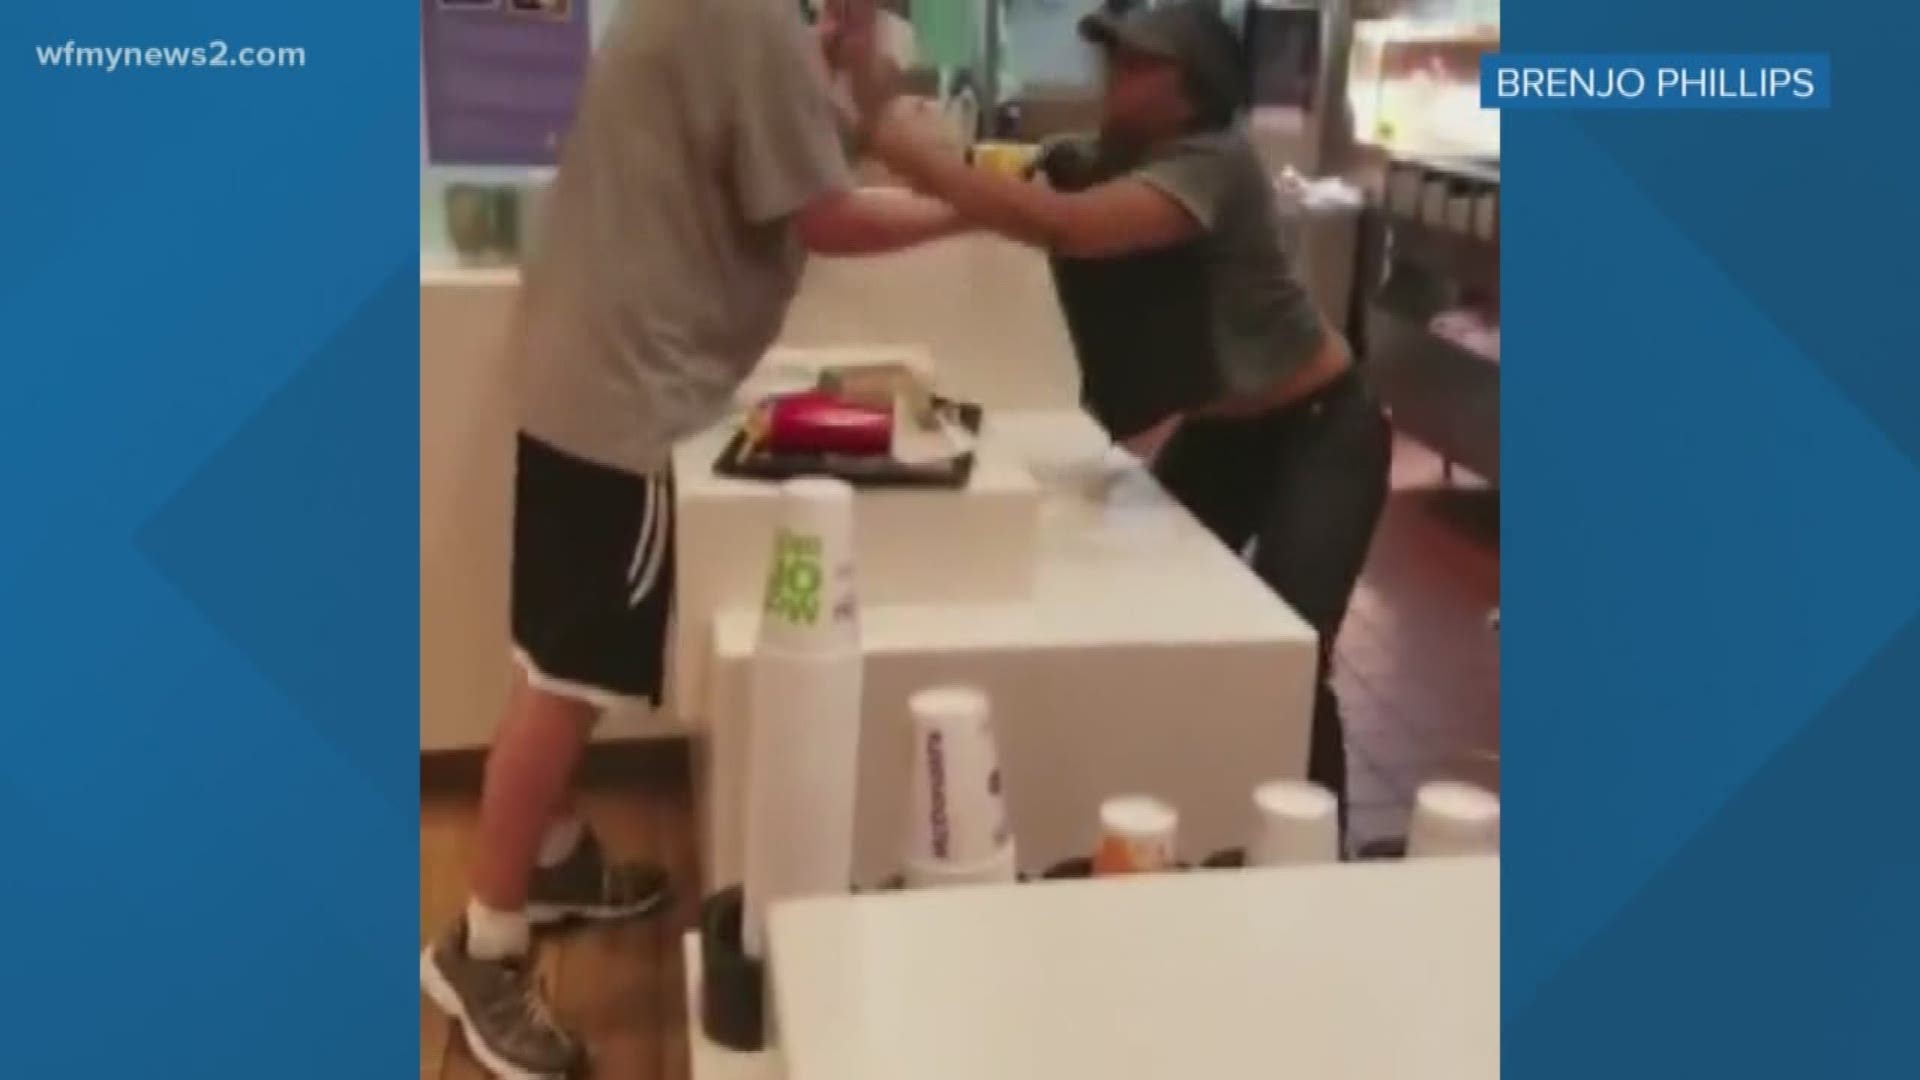 The viral video of a McDonald's worker fighting off a customer has raised questions on who should intervene when violence in the workplace takes place.